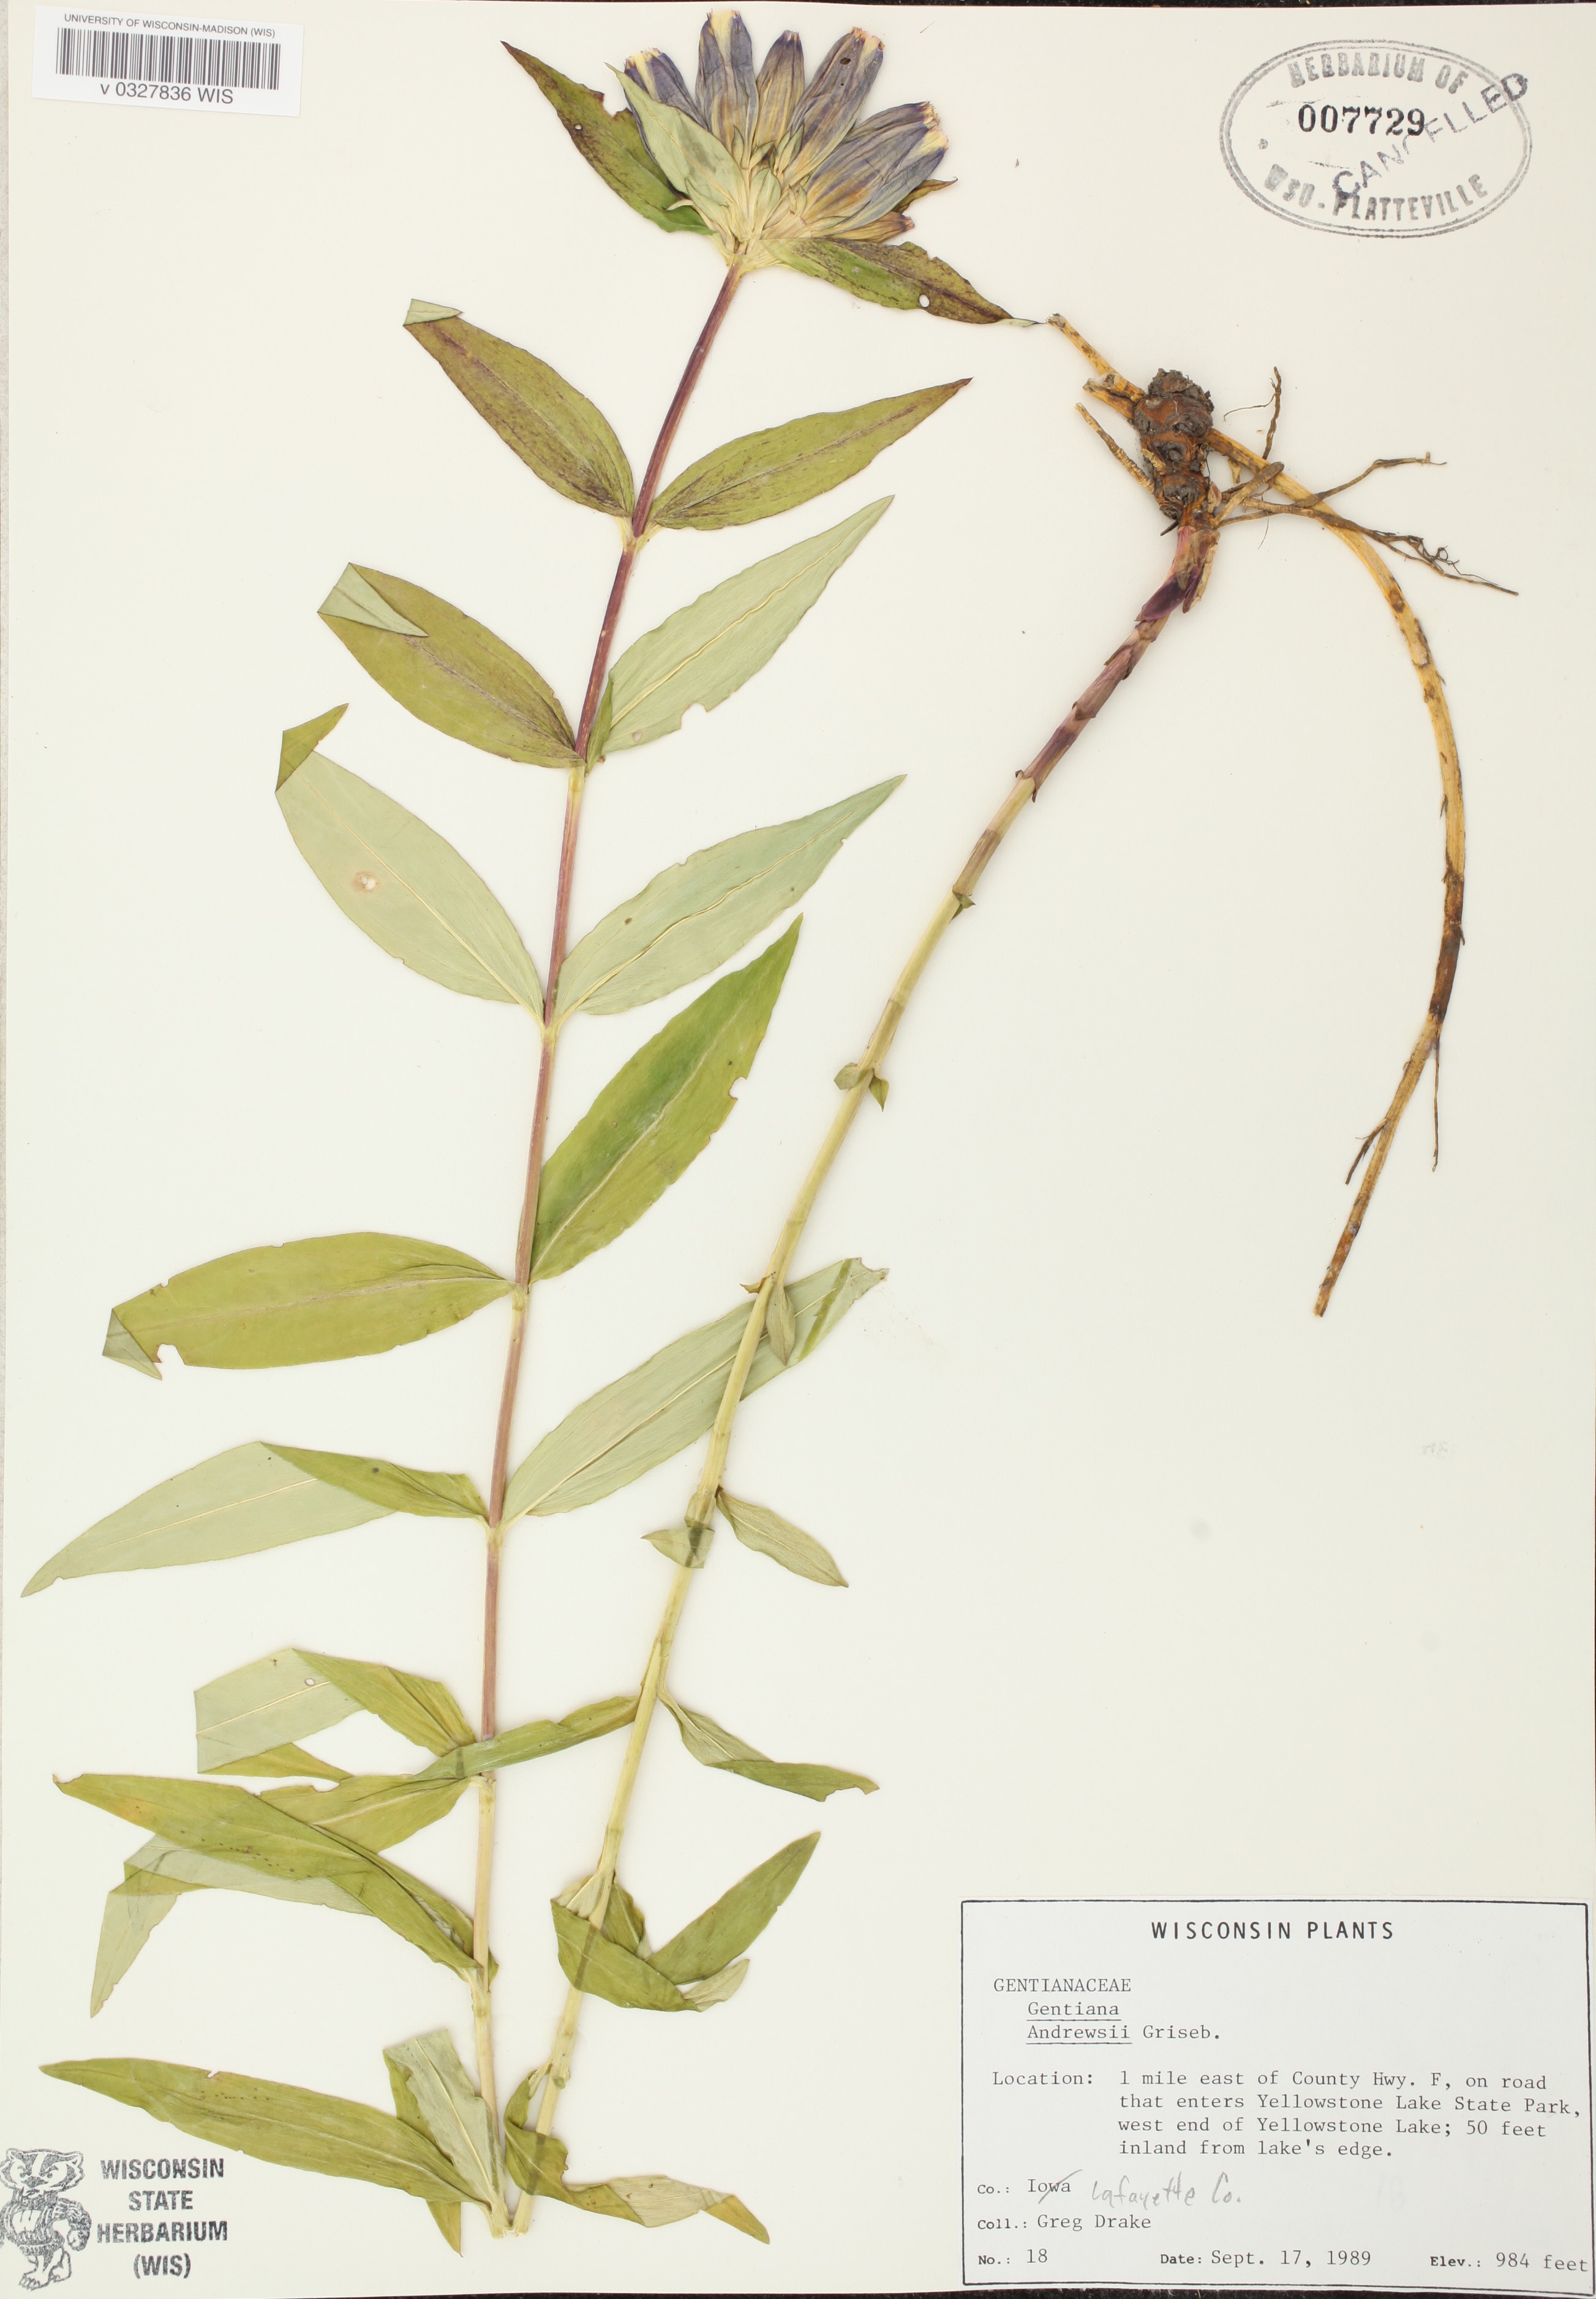 Closed Gentian specimen collected in Yellowstone Lake State Park in Lafayette County on September 17, 1989.